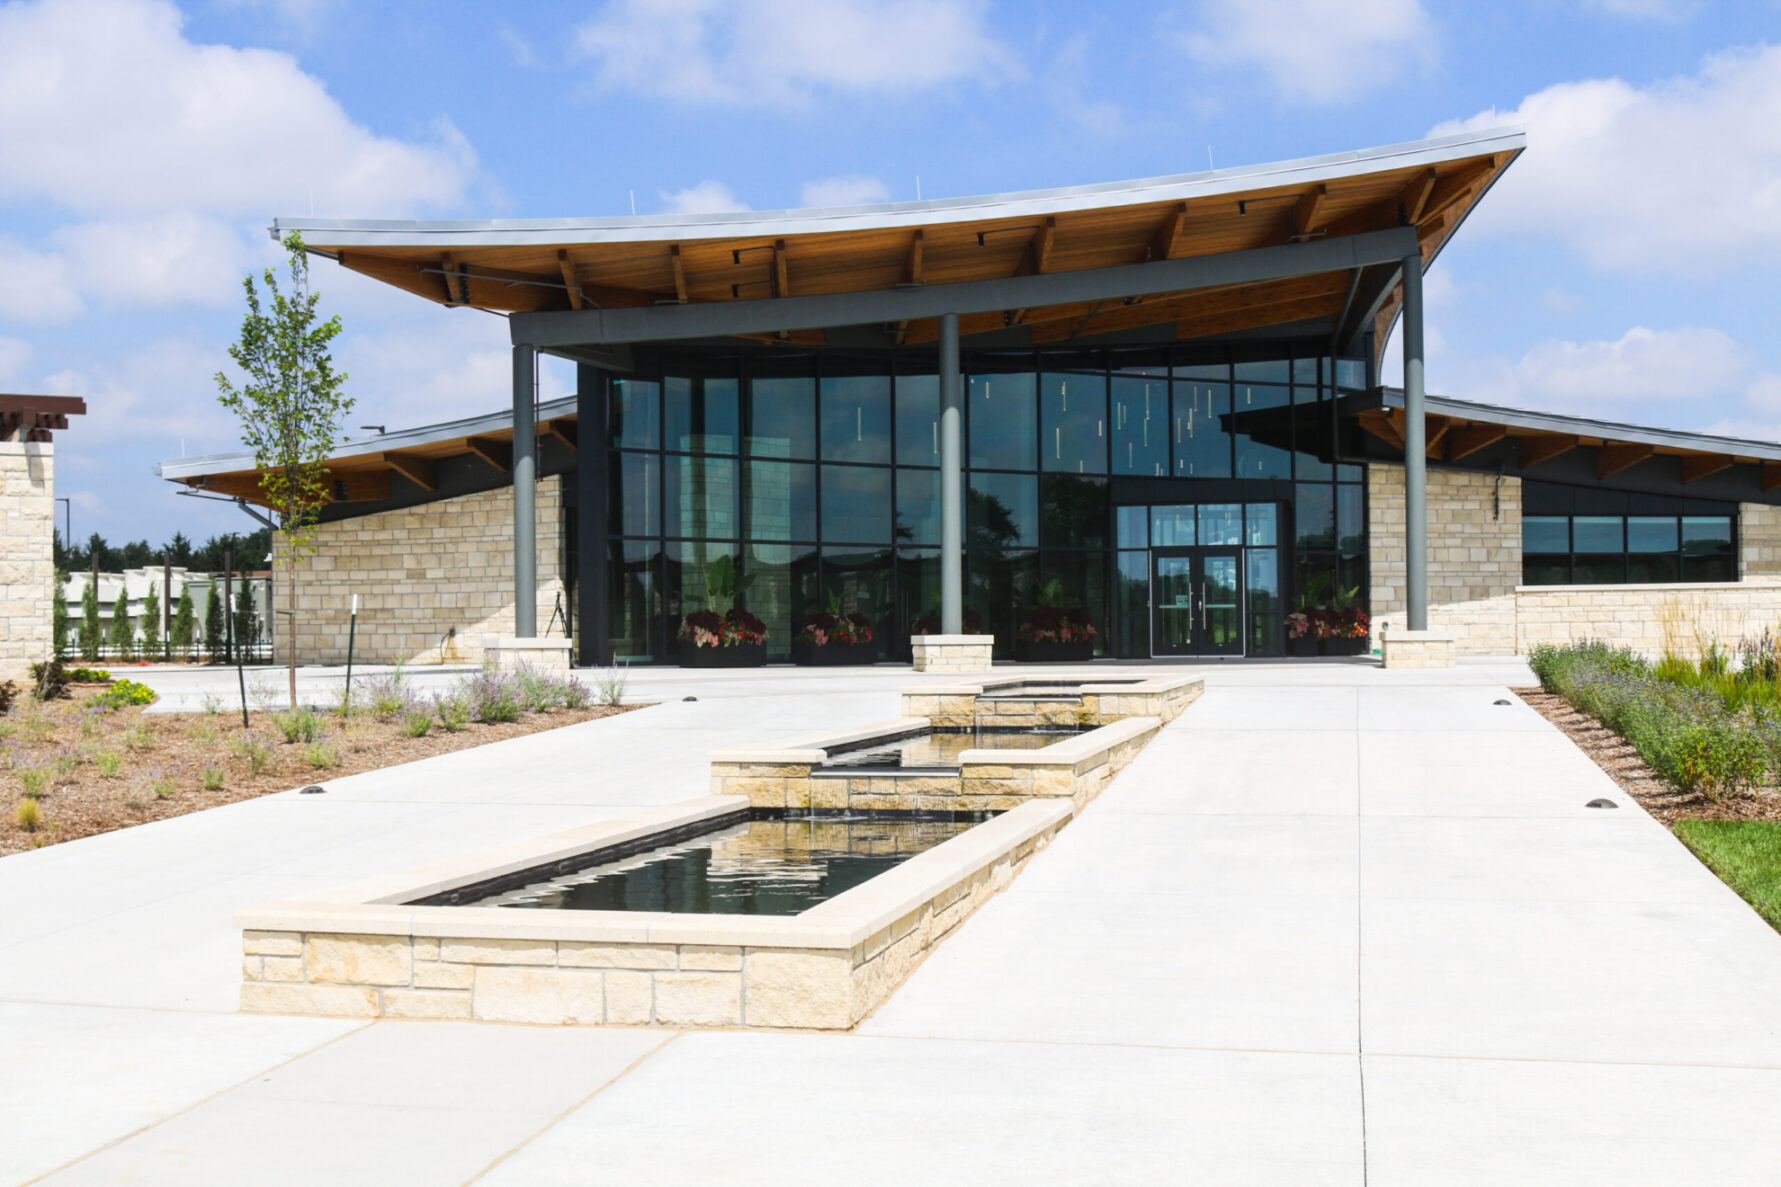 LongHouse Visitor Center at the Overland Park Arboretum